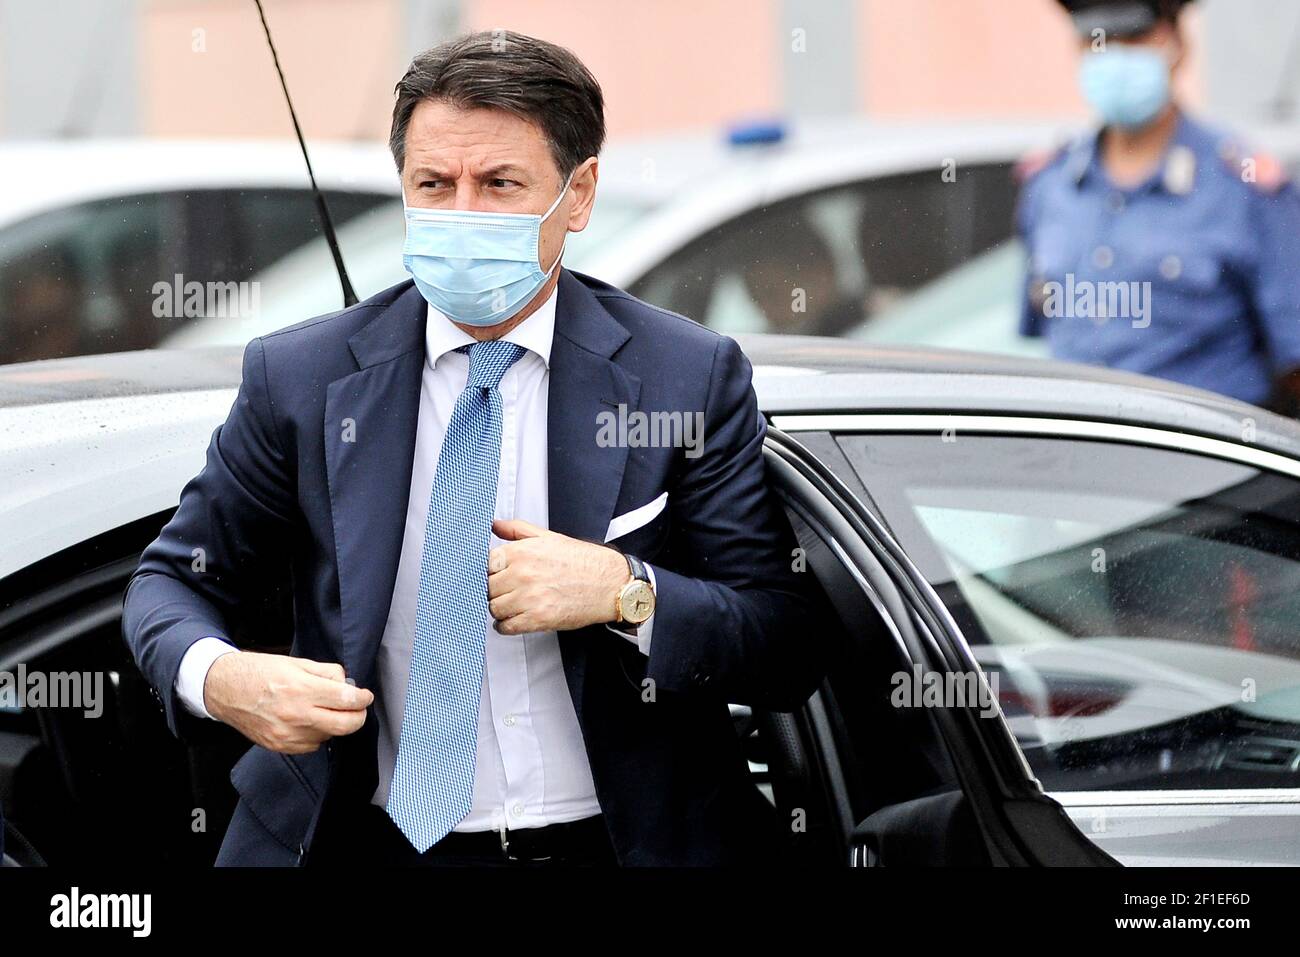 Giuseppe Conte President of the Council of Ministers of the Italian Republic wearing an anti-coronavirus mask, during a visit to the 'Francesco Gesuè' Stock Photo